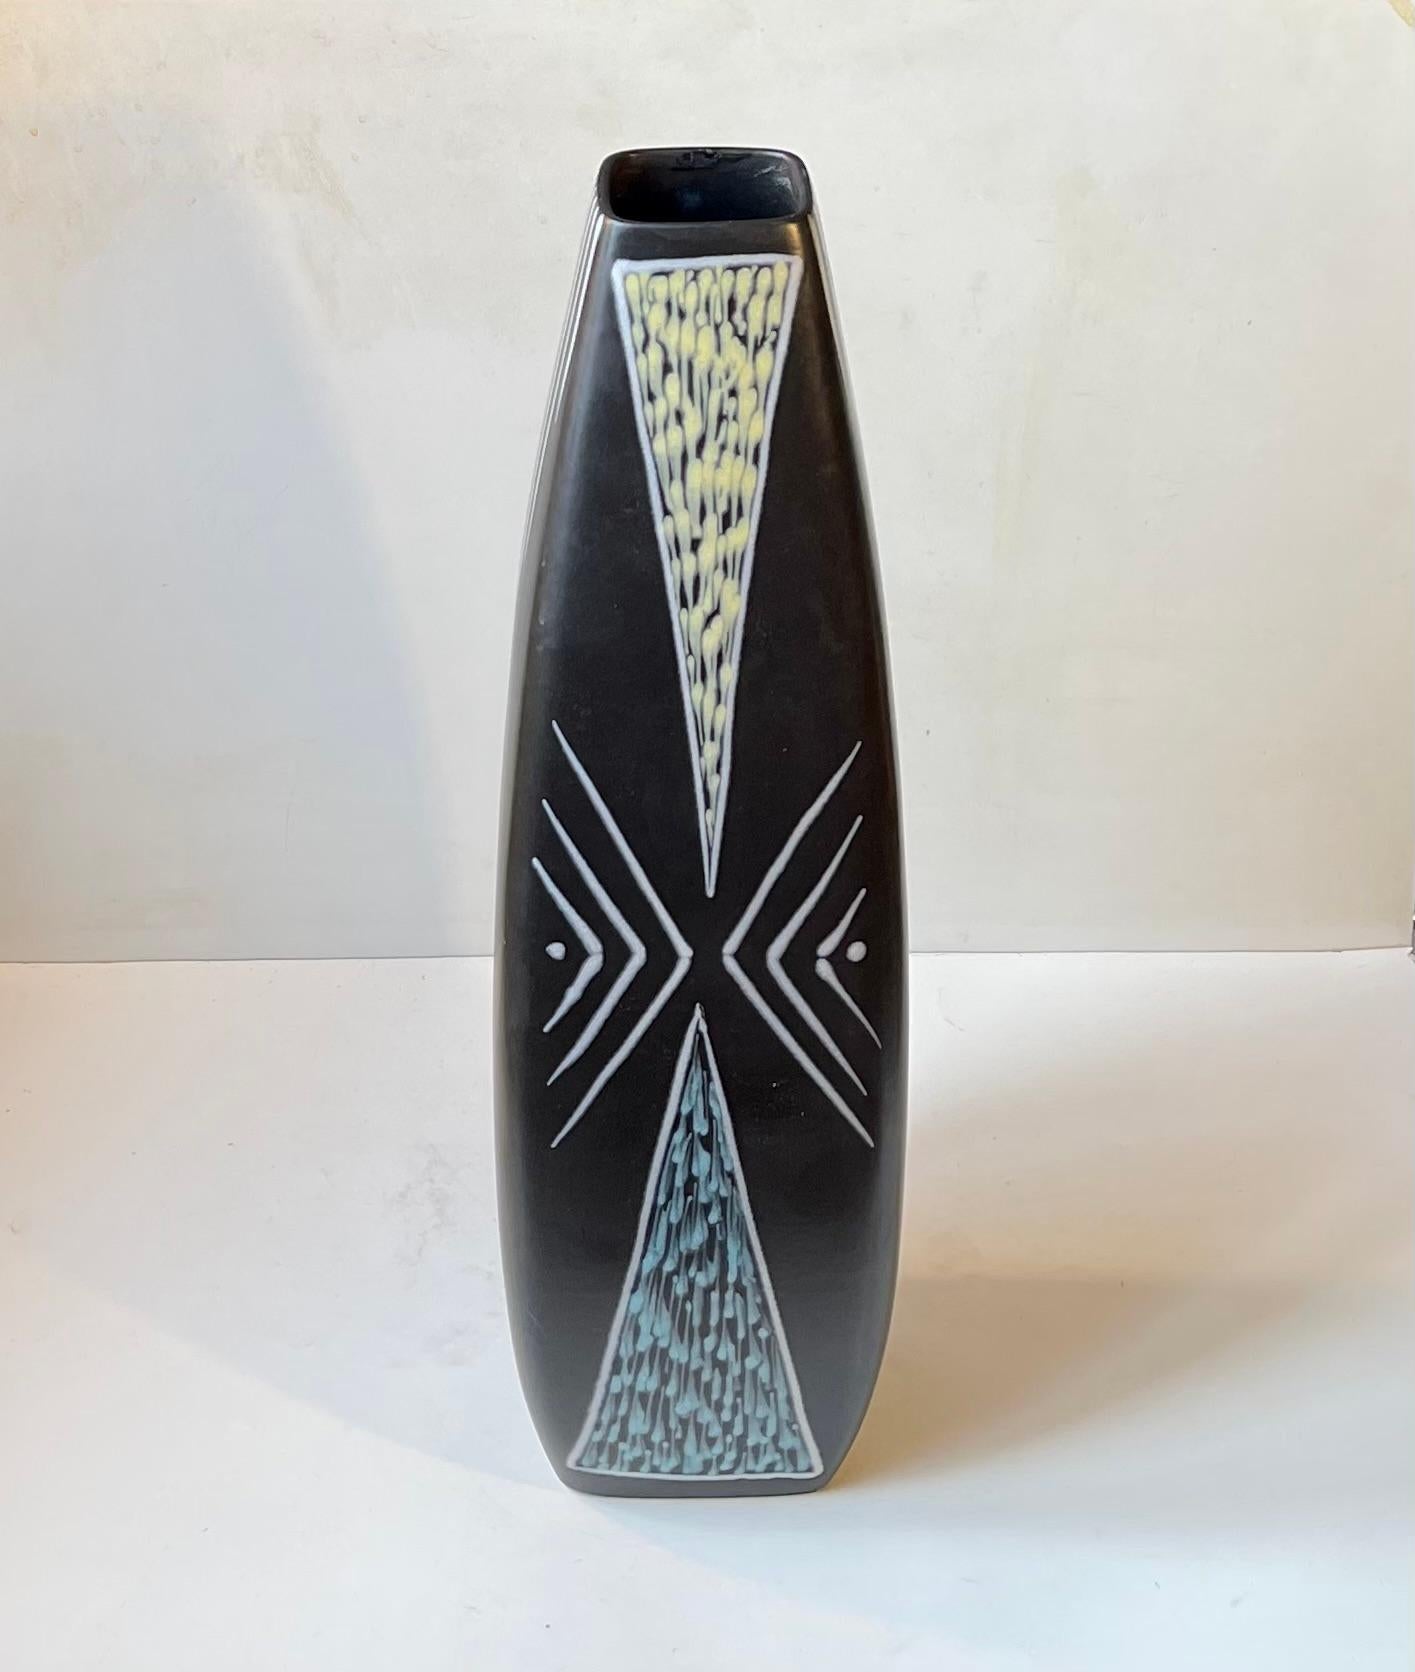 - Burgundia floor vase designed by Svend Aage Holm-Sorensen 
- Black main glaze with white and pastel geometric decor by Svend Aage Jensen 
- Manufactured by Søholm in Denmark from 1956 
- Nice intact vintage condition only tiny repair to the top